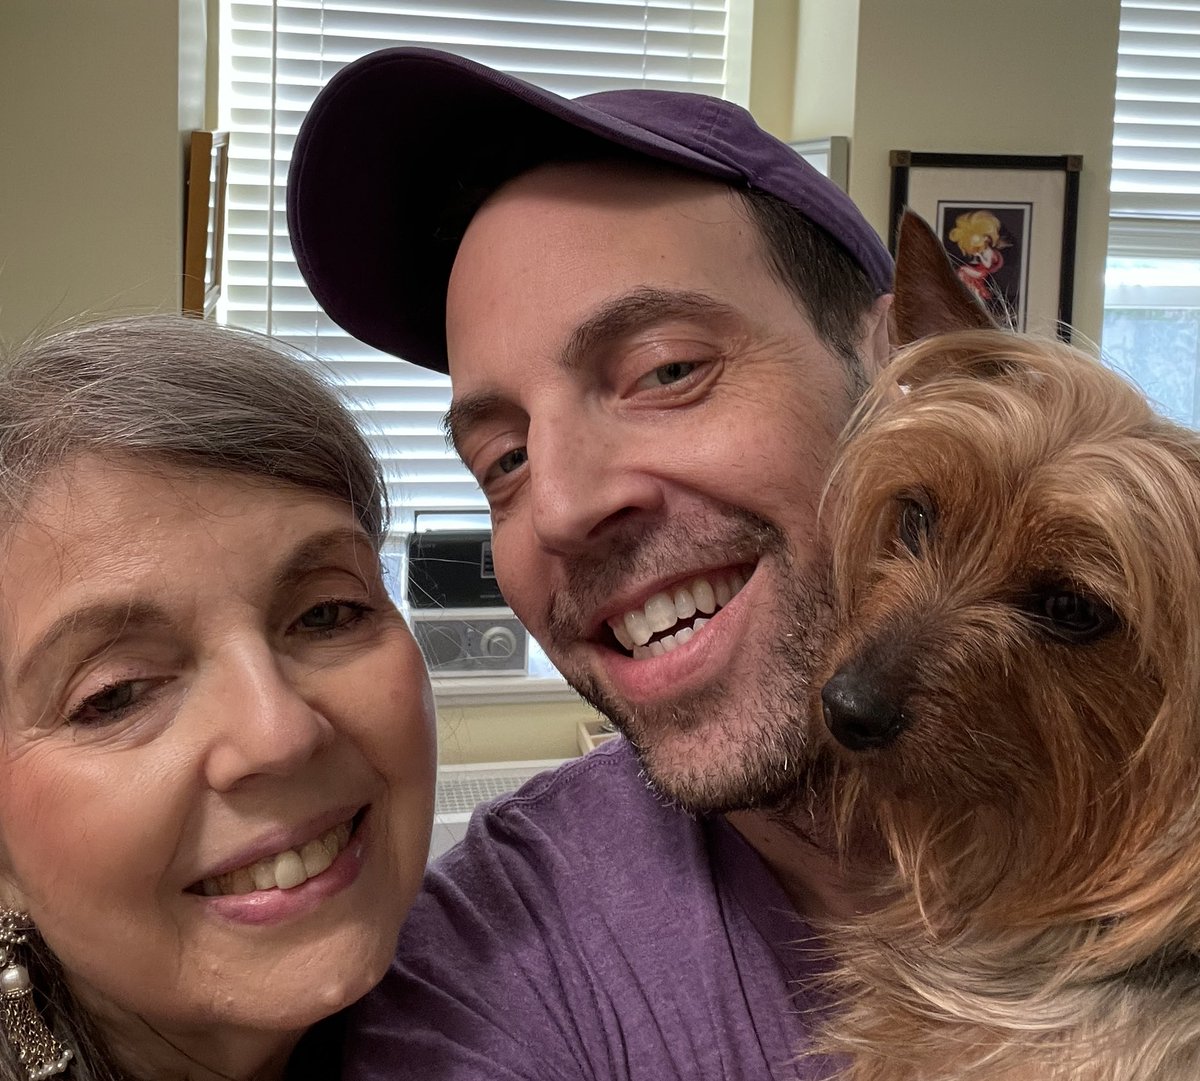 Me, my mom Minna and Anjelika celebrate #PutOnPurple day for Lupus awareness. I may be a patient with this disease, but my mother is a wonderful caregiver. Caregivers are the best. 🙏💜